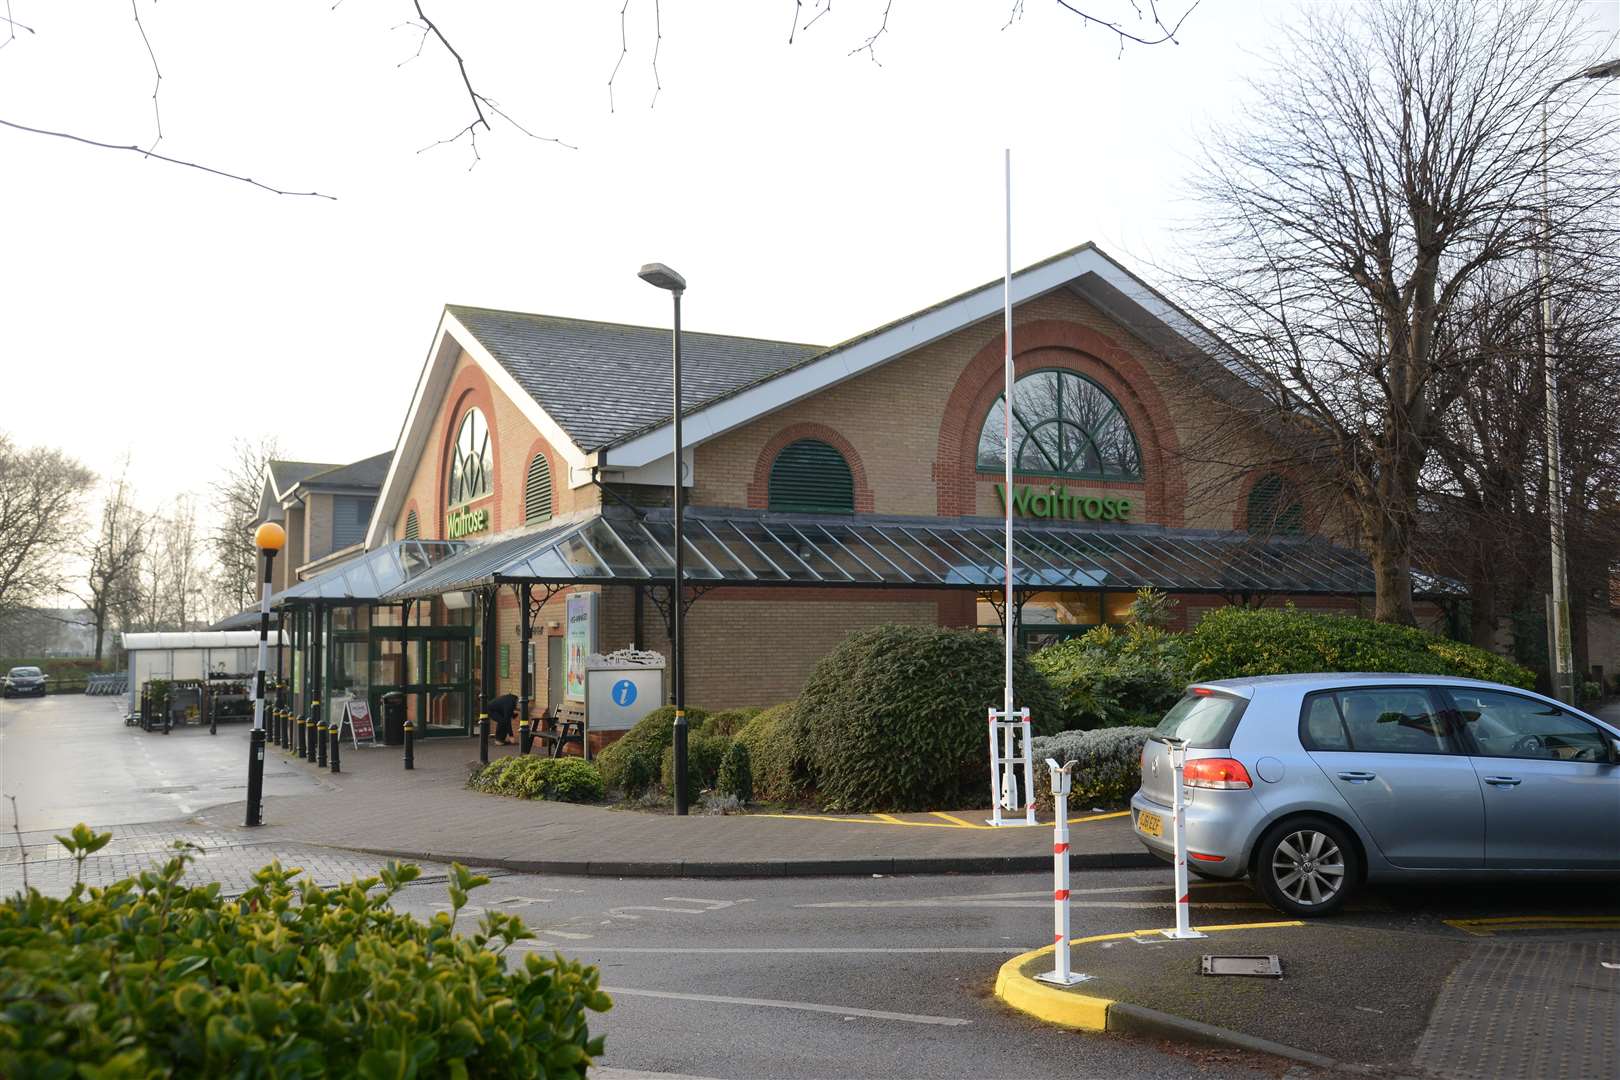 Waitrose is introducing new measures to tackle the spread of coronavirus